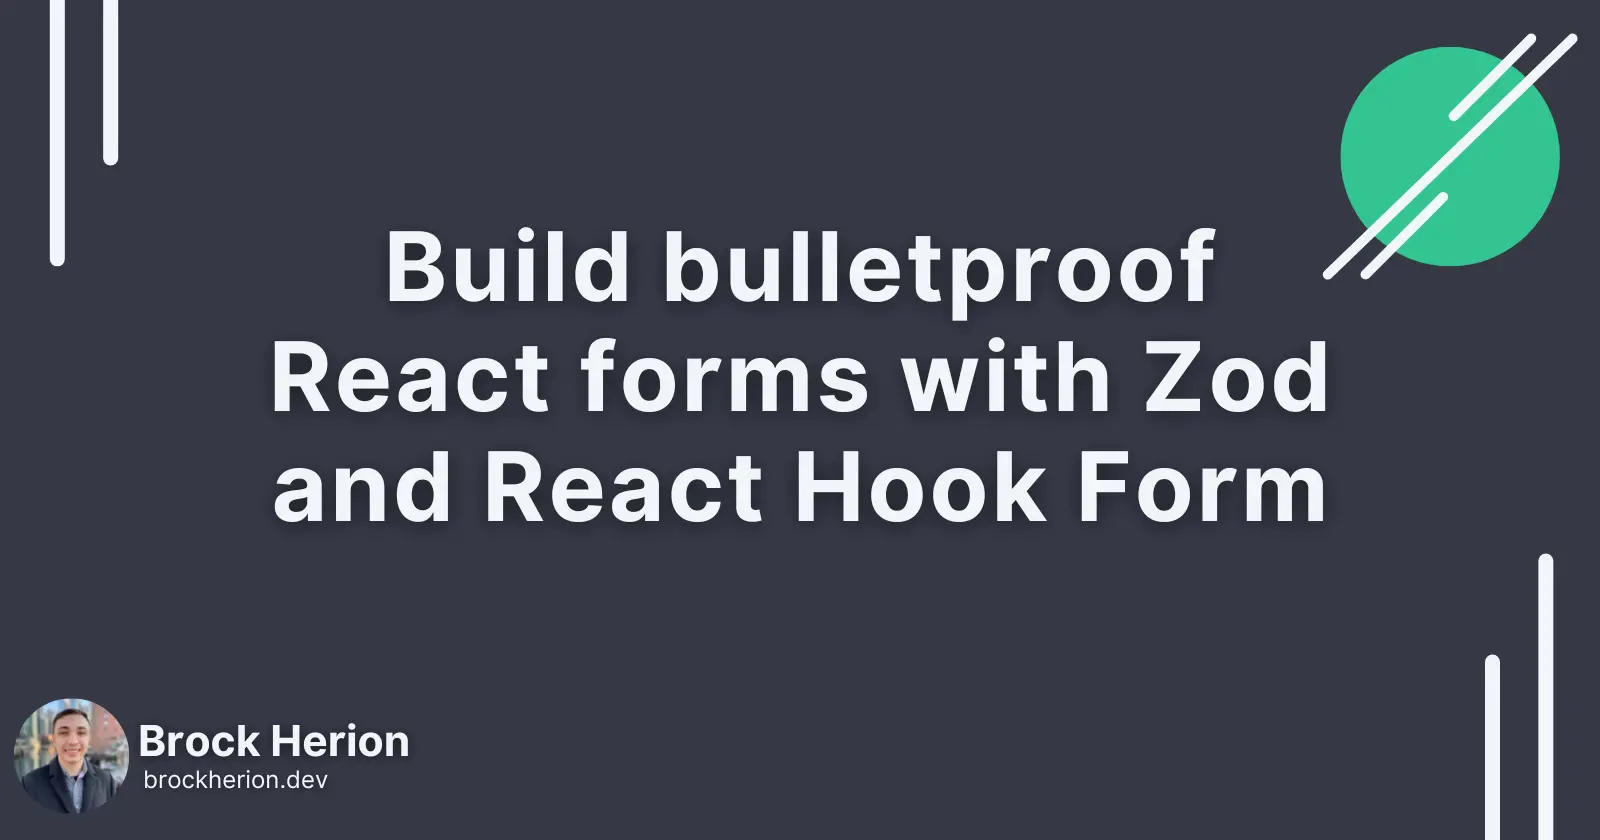 Build bulletproof React forms with Zod and React Hook Form